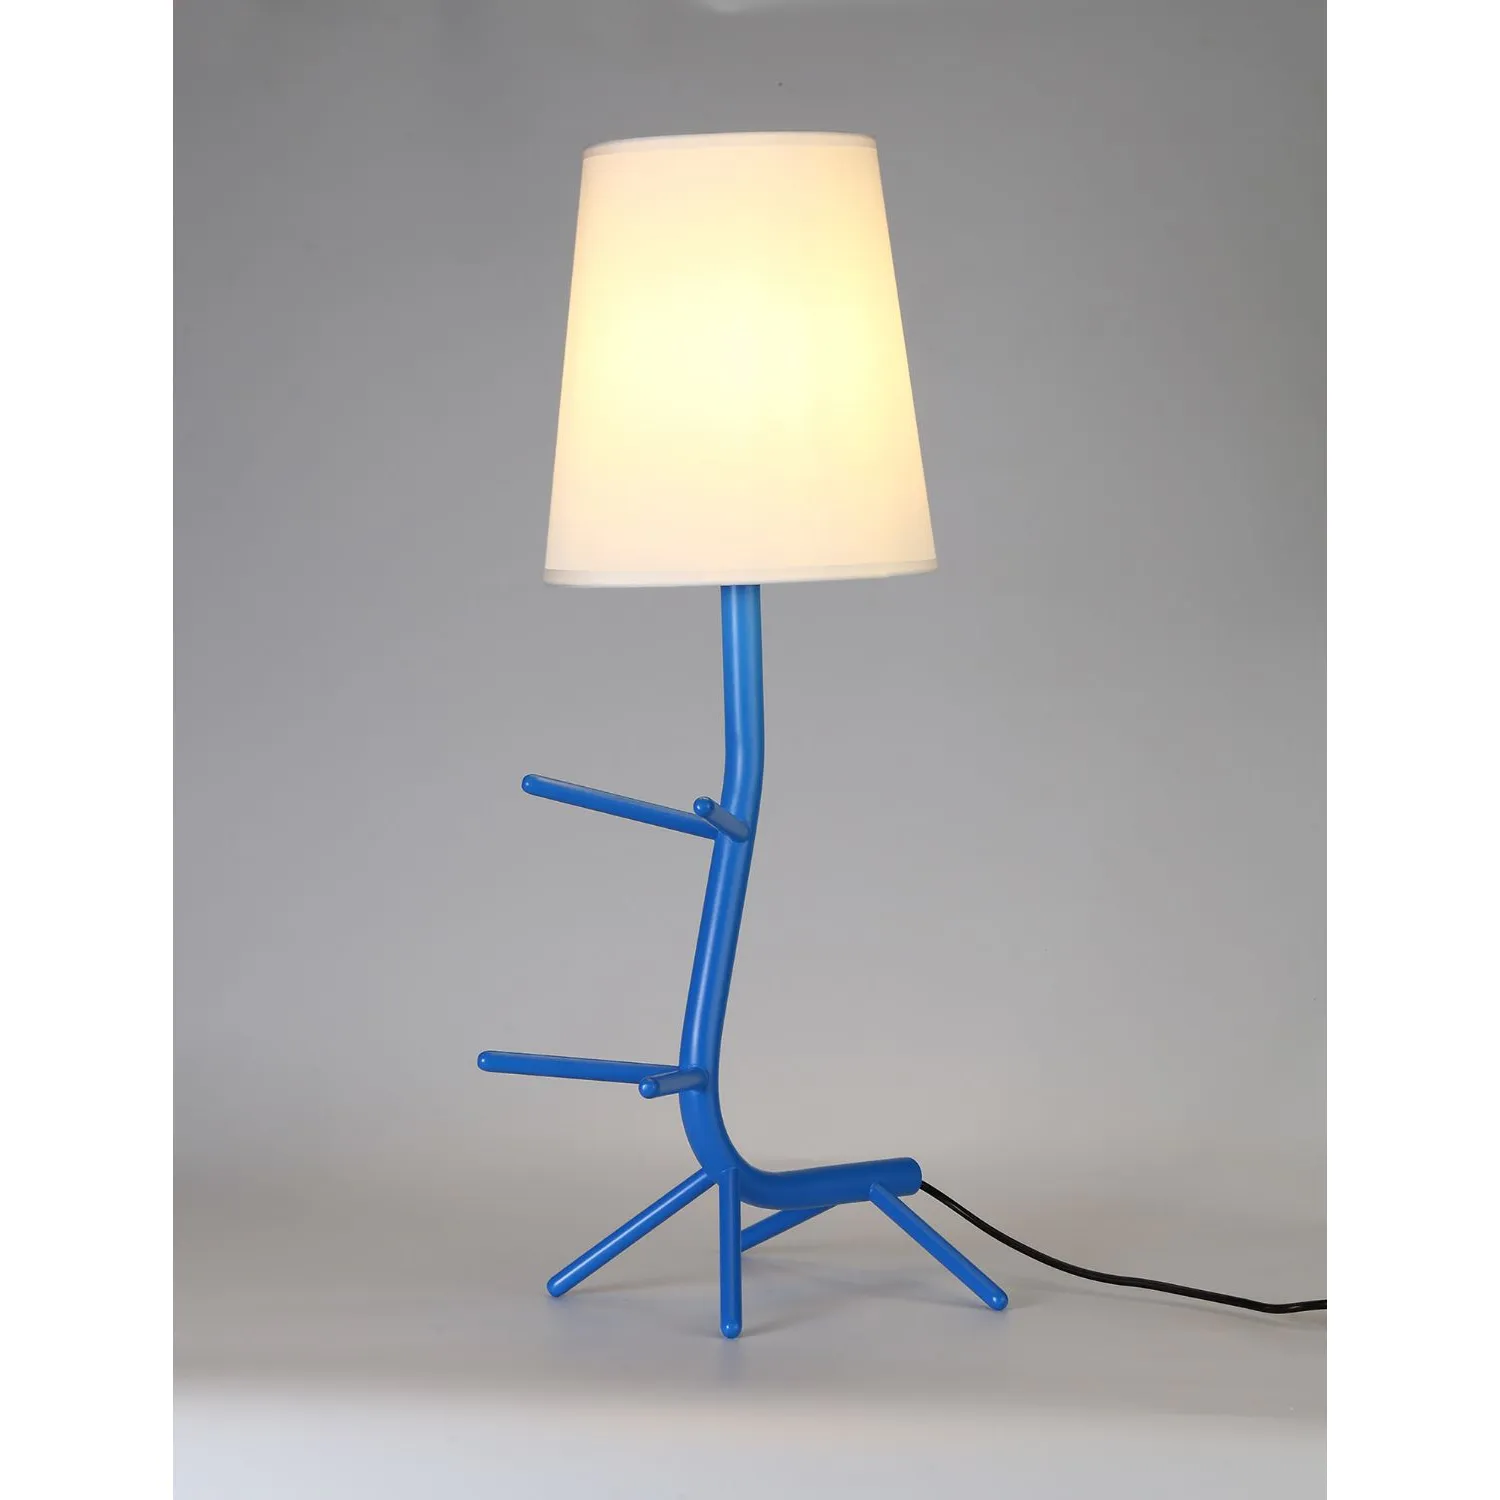 Centipede Table Lamp With Shade, 1 x E27, Blue White